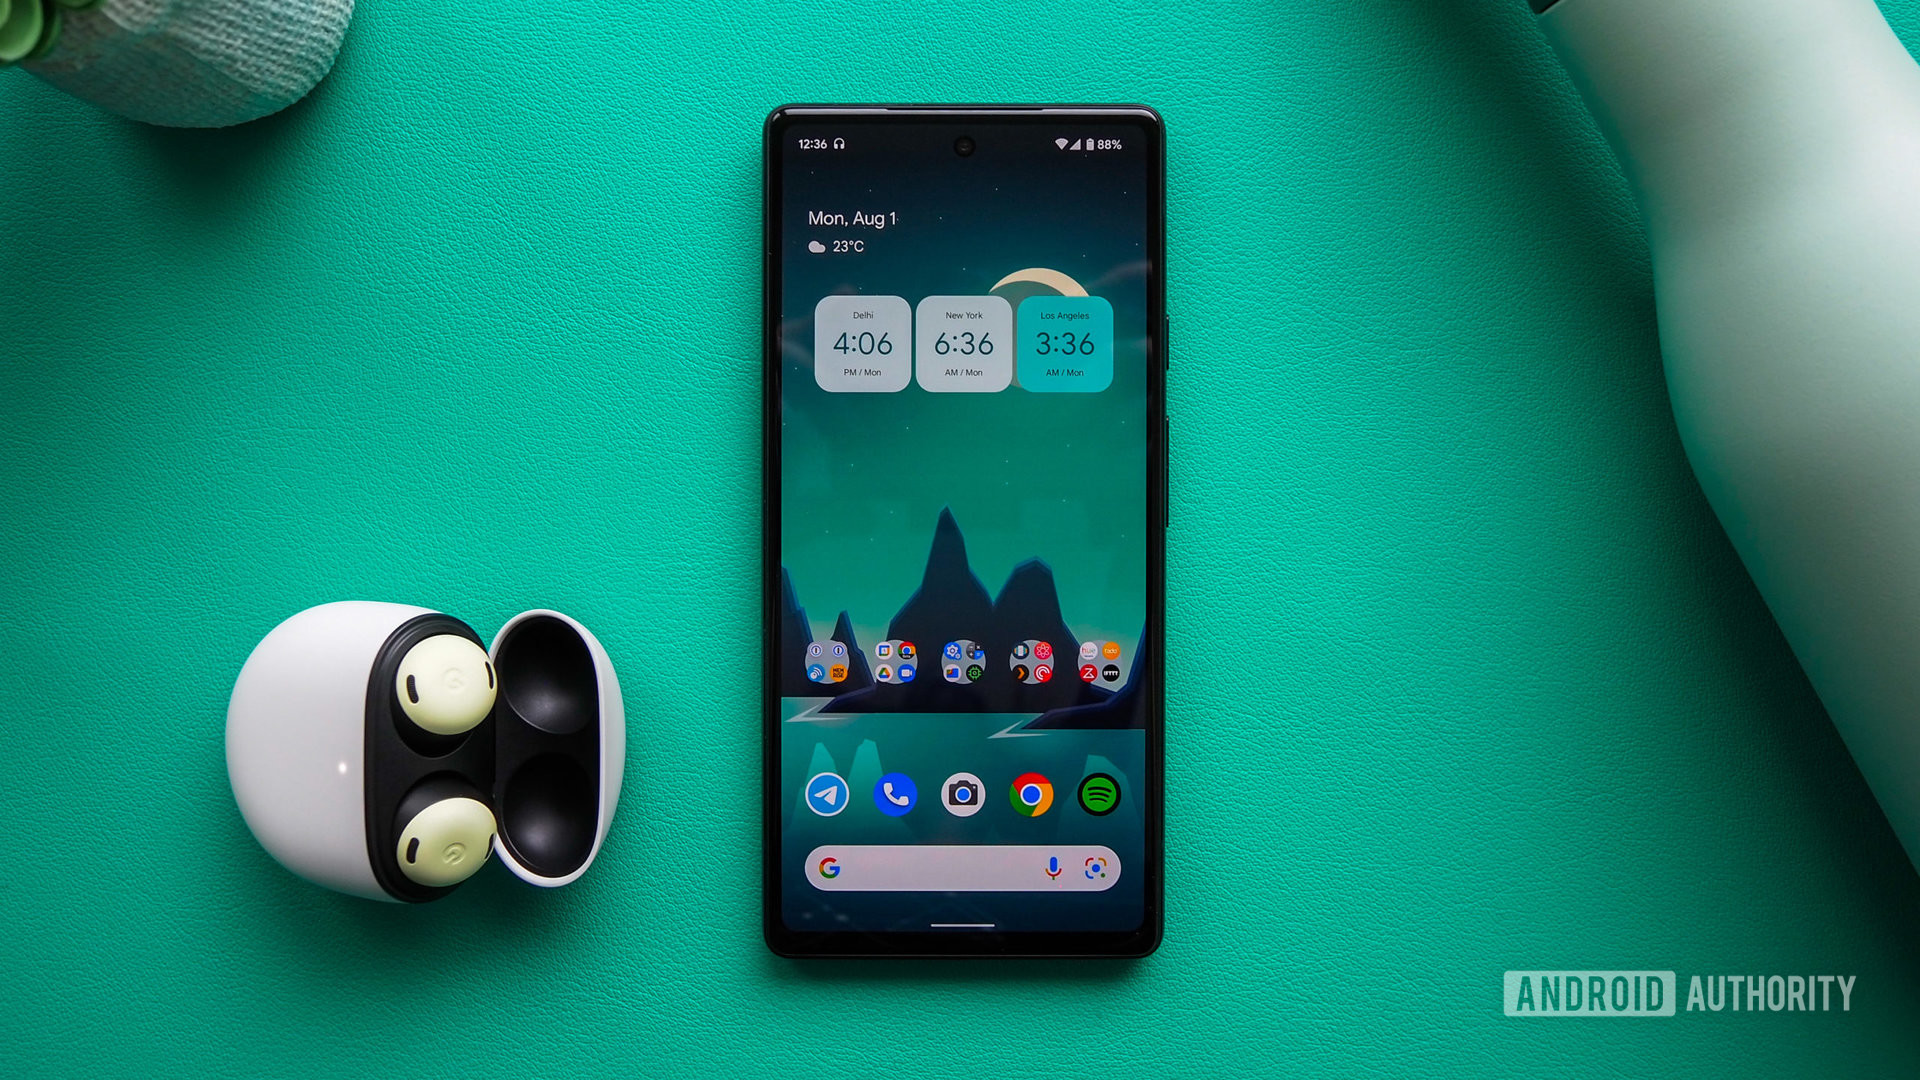 Google Pixel 6a, display on with the homescreen showing, next to Pixel Buds Pro, on a turquoise background